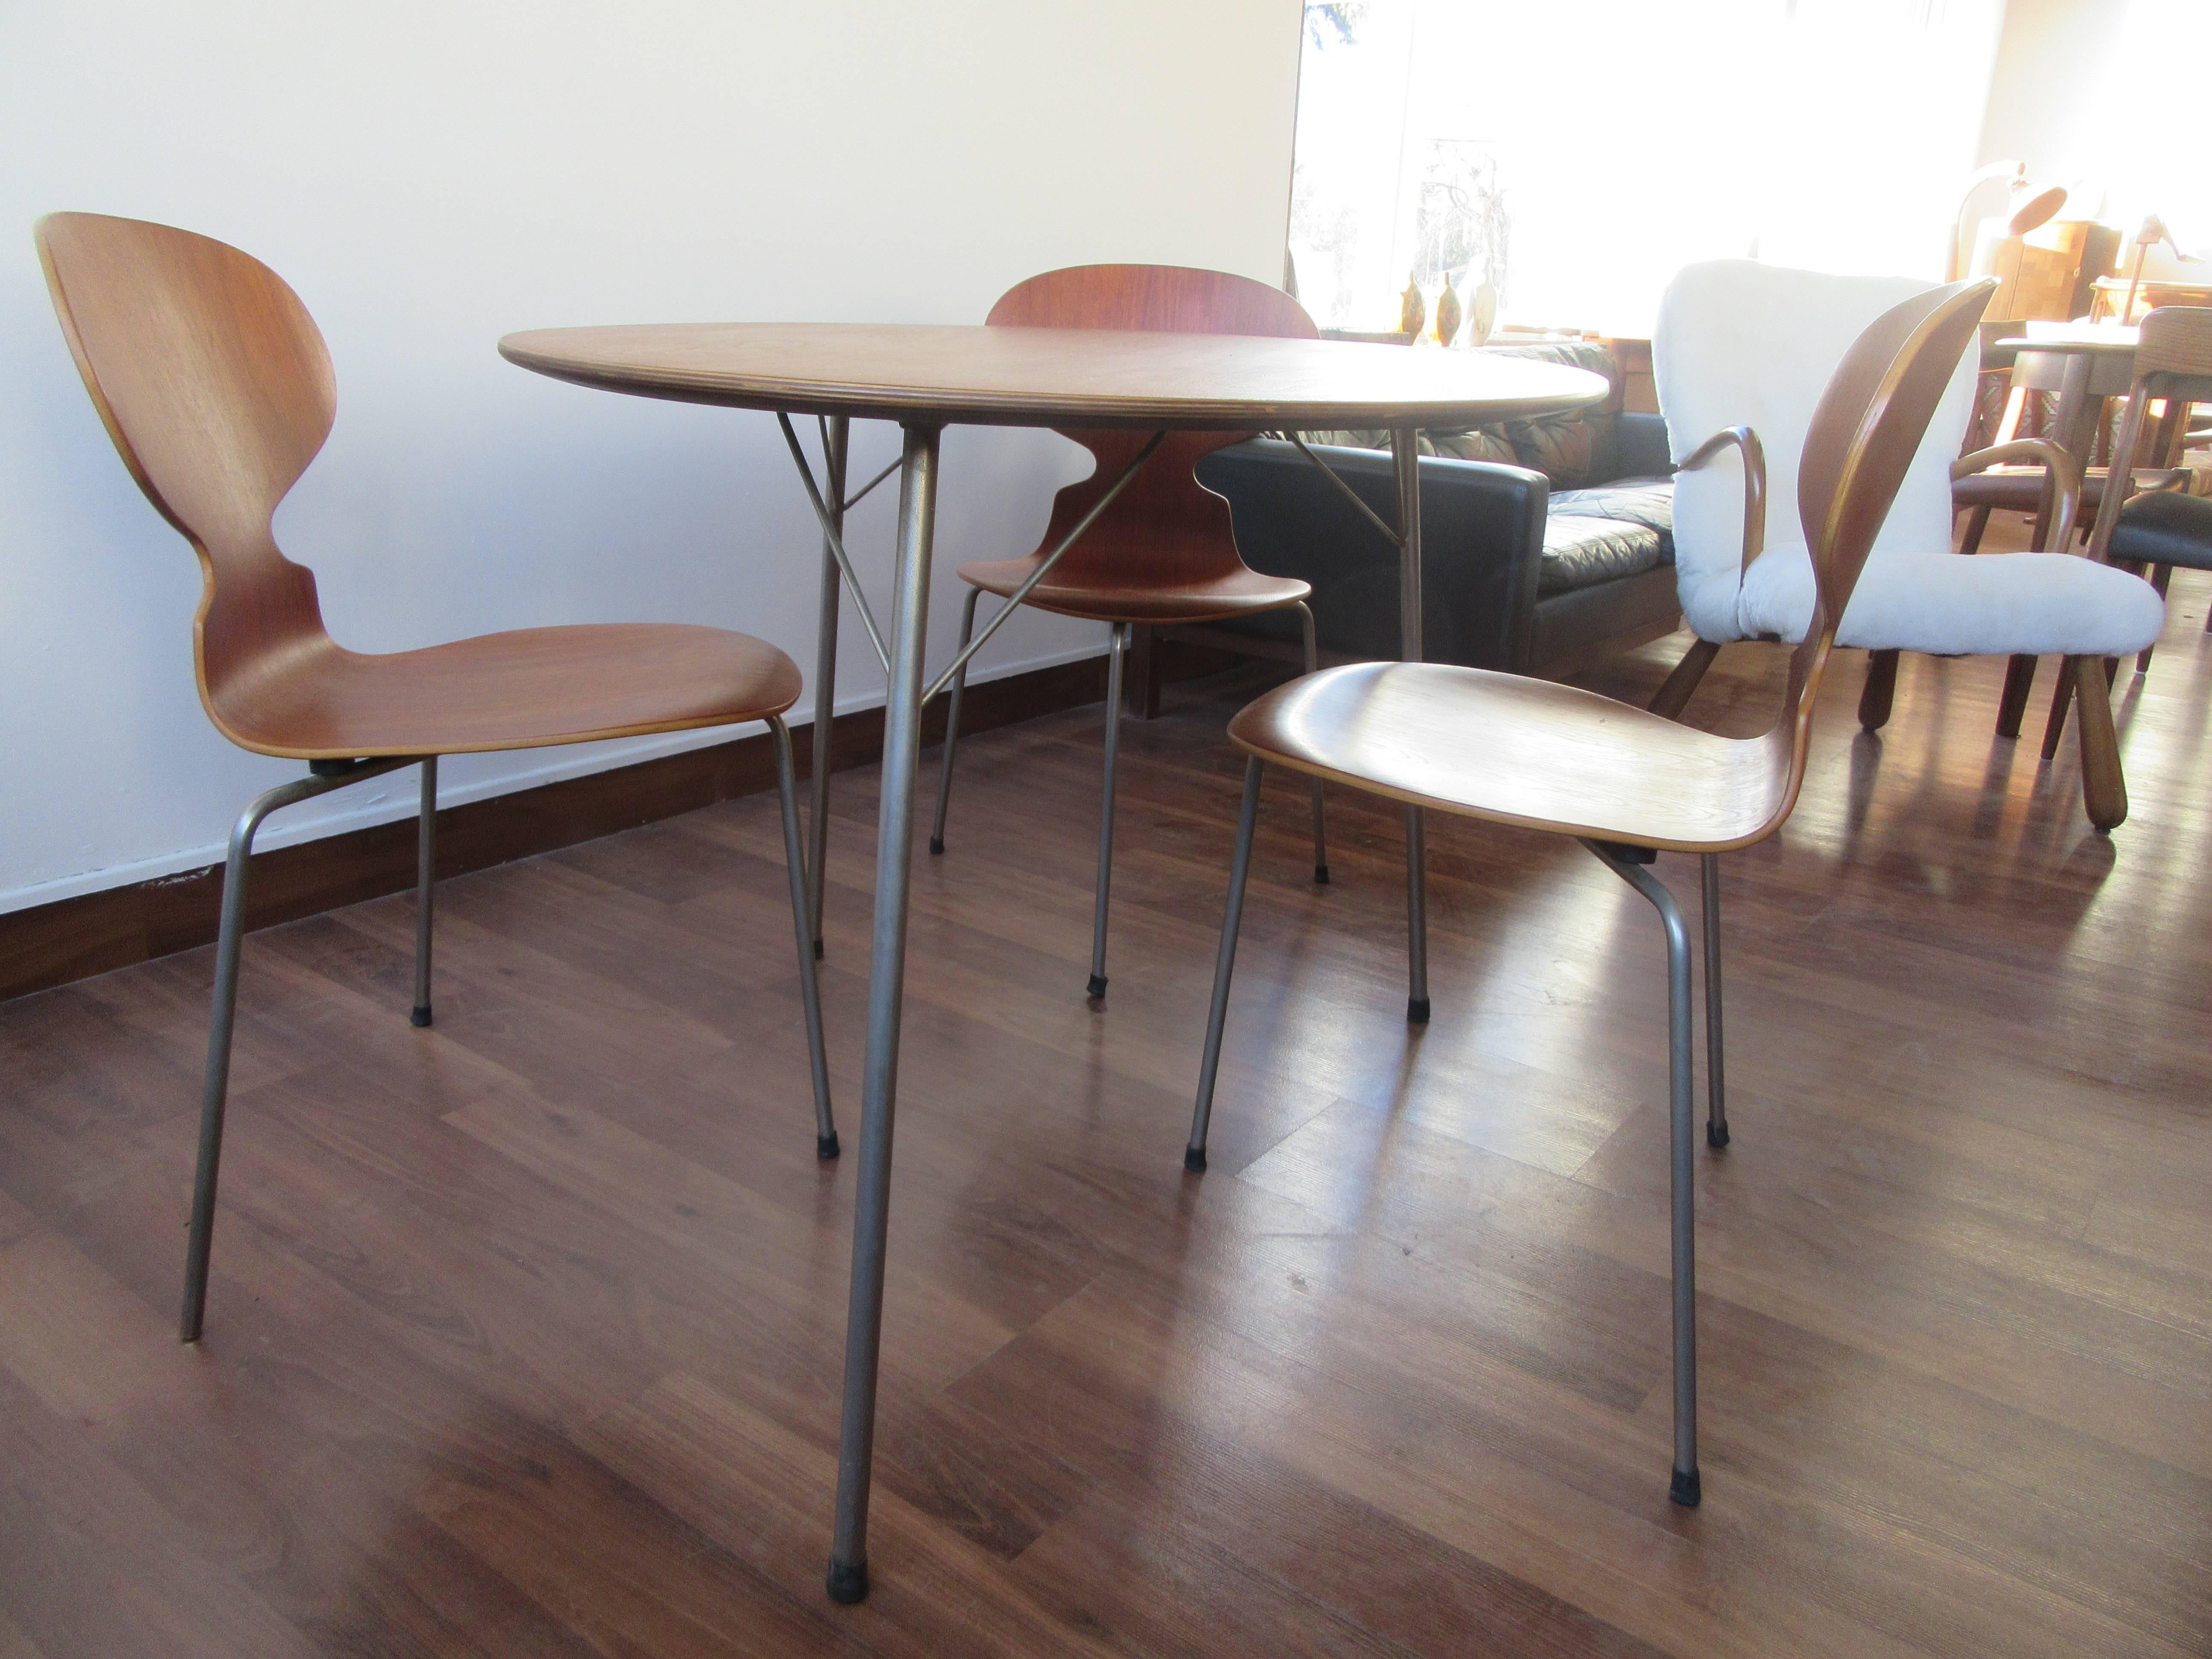 Steel Pristine Three-Legged Ant Table Set in Teak with Three Chairs by Arne Jacobsen For Sale